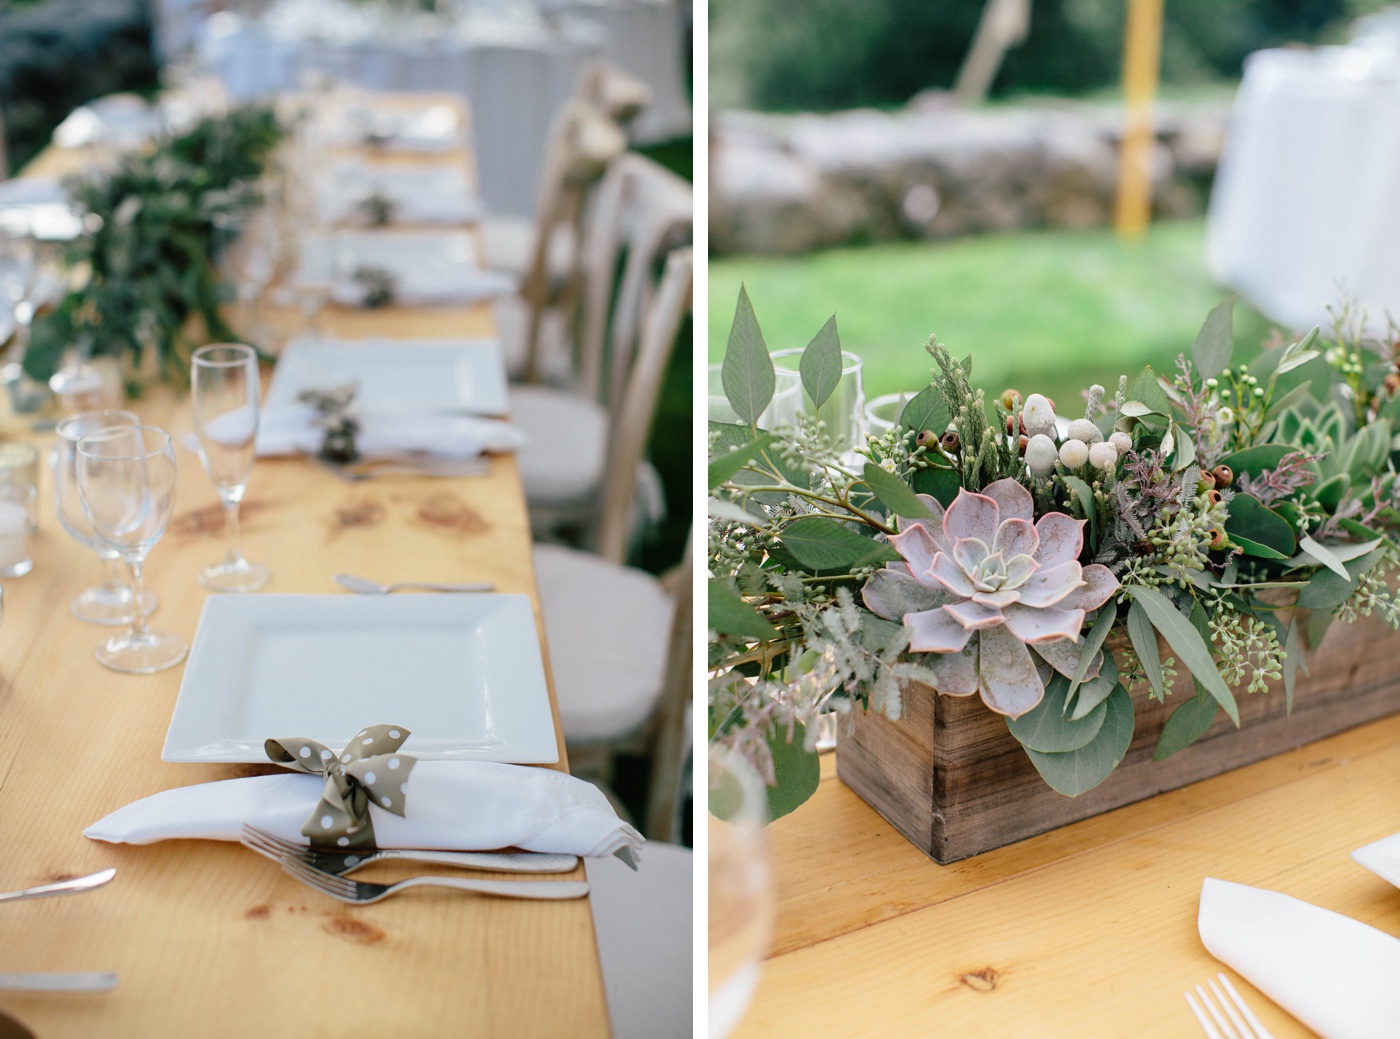 Succulent centerpiece in a wooden planter box at a wedding